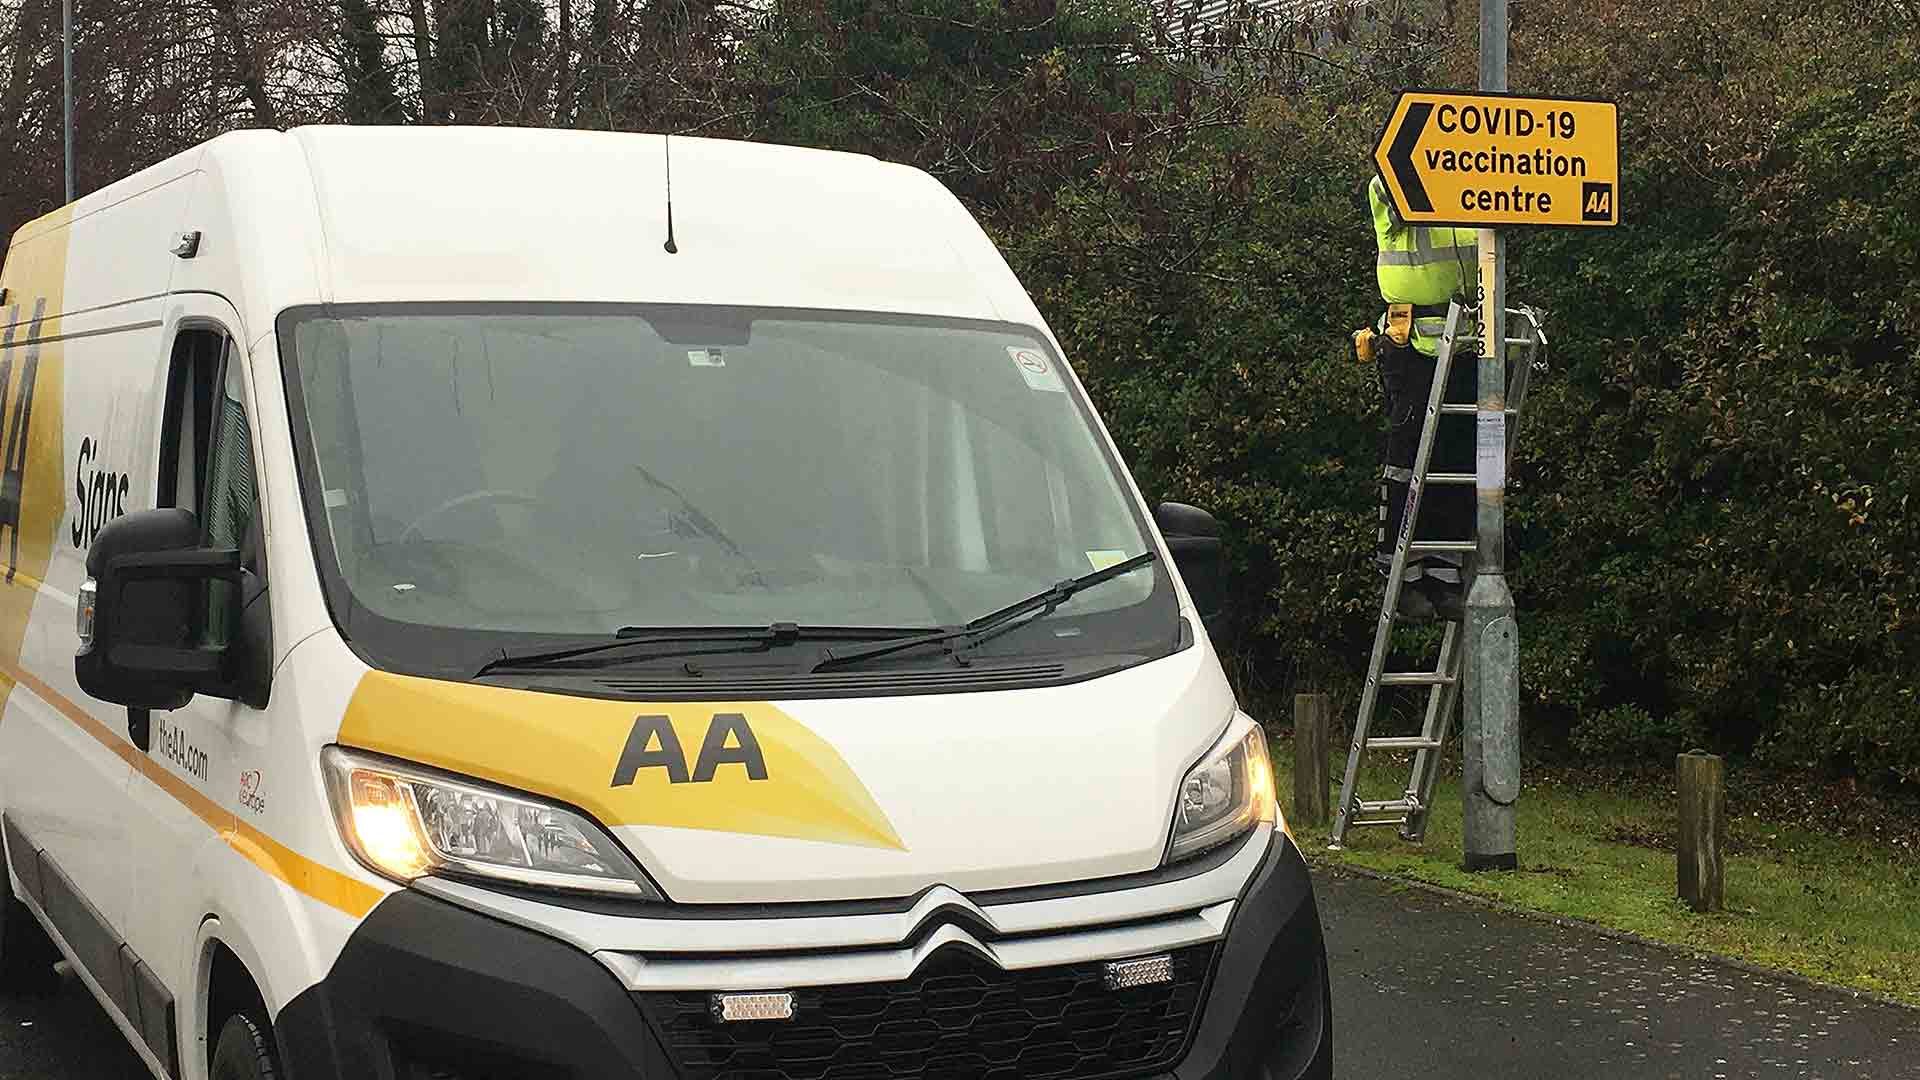 AA Covid-19 vaccination centre road sign